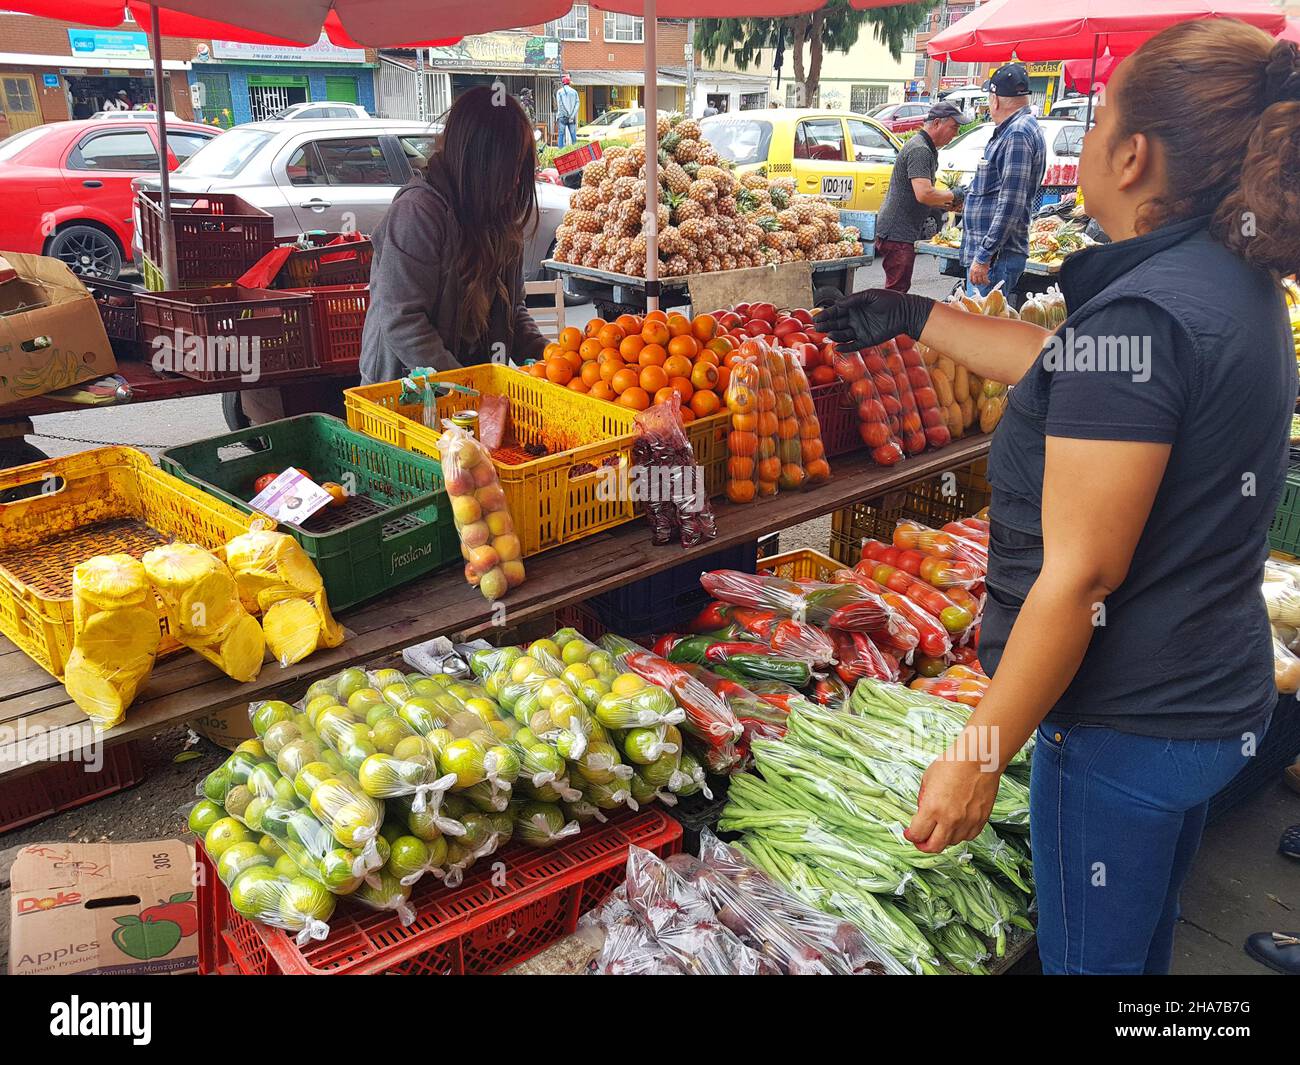 BOGOTA, COLOMBIA - Mar 05, 2018: A marketplace with people sell and buy fruits in Bogota, Colombia Stock Photo